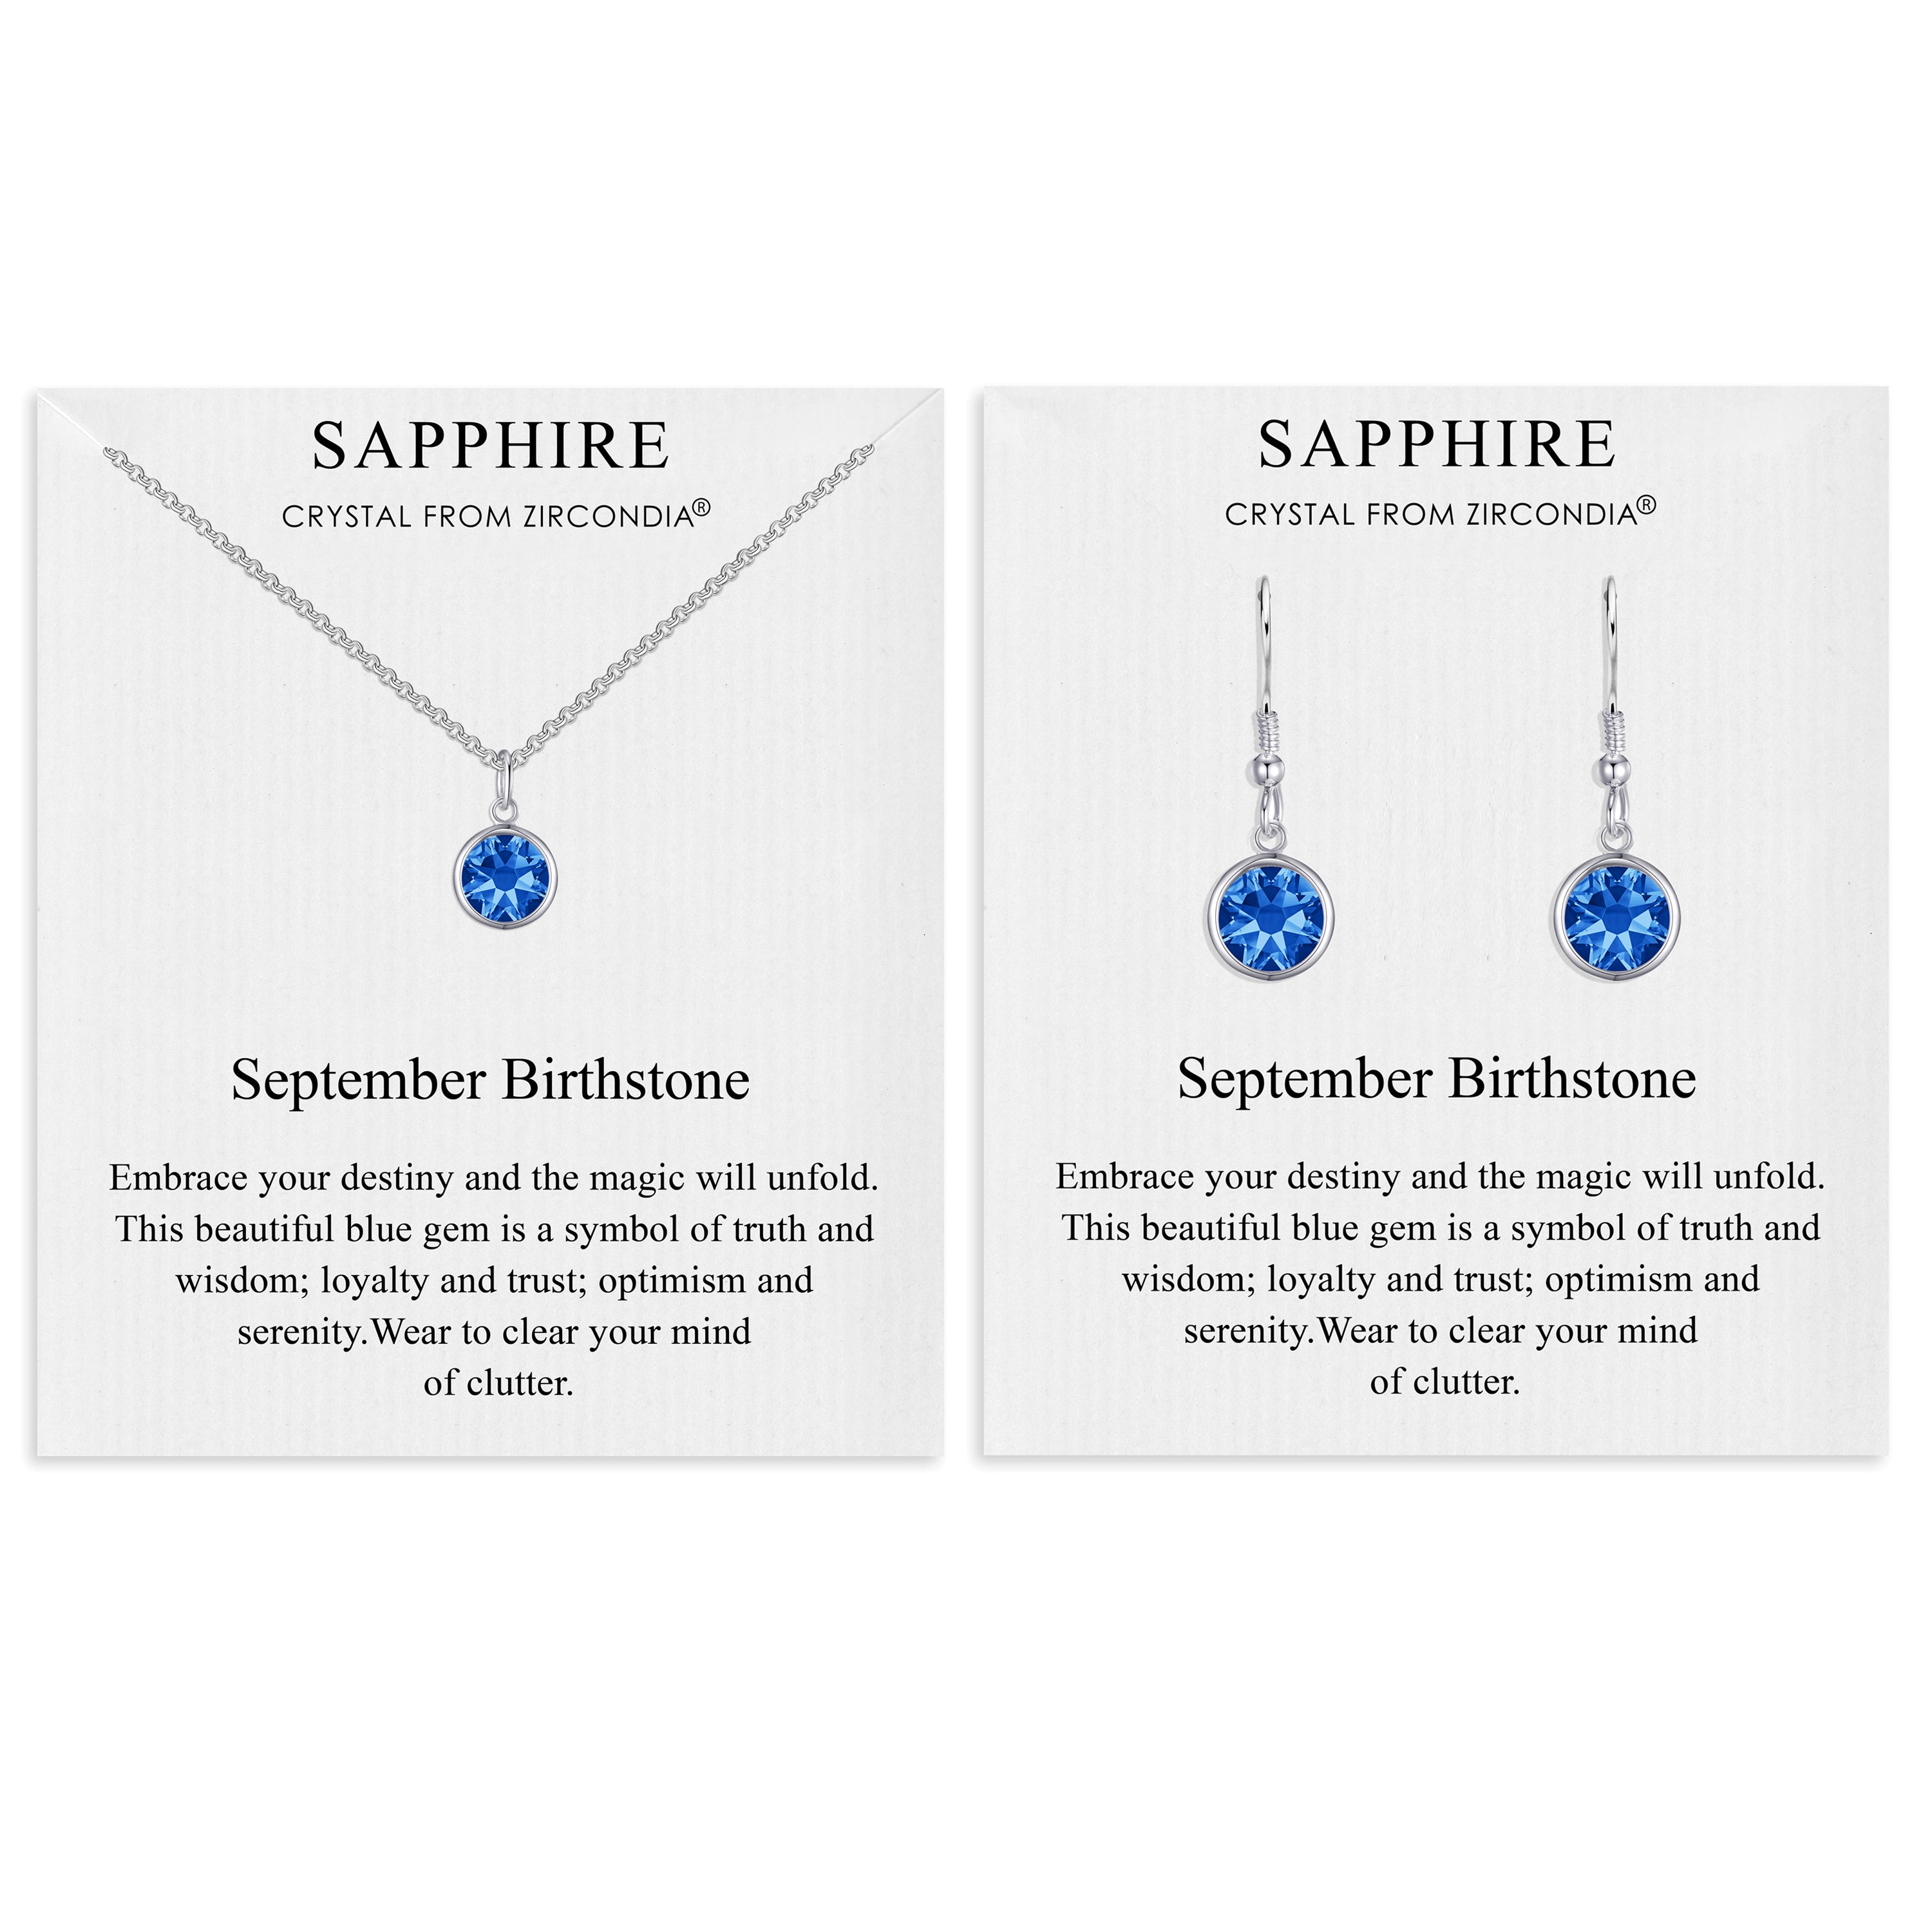 September (Sapphire) Birthstone Necklace & Drop Earrings Set Created with Zircondia® Crystals by Philip Jones Jewellery